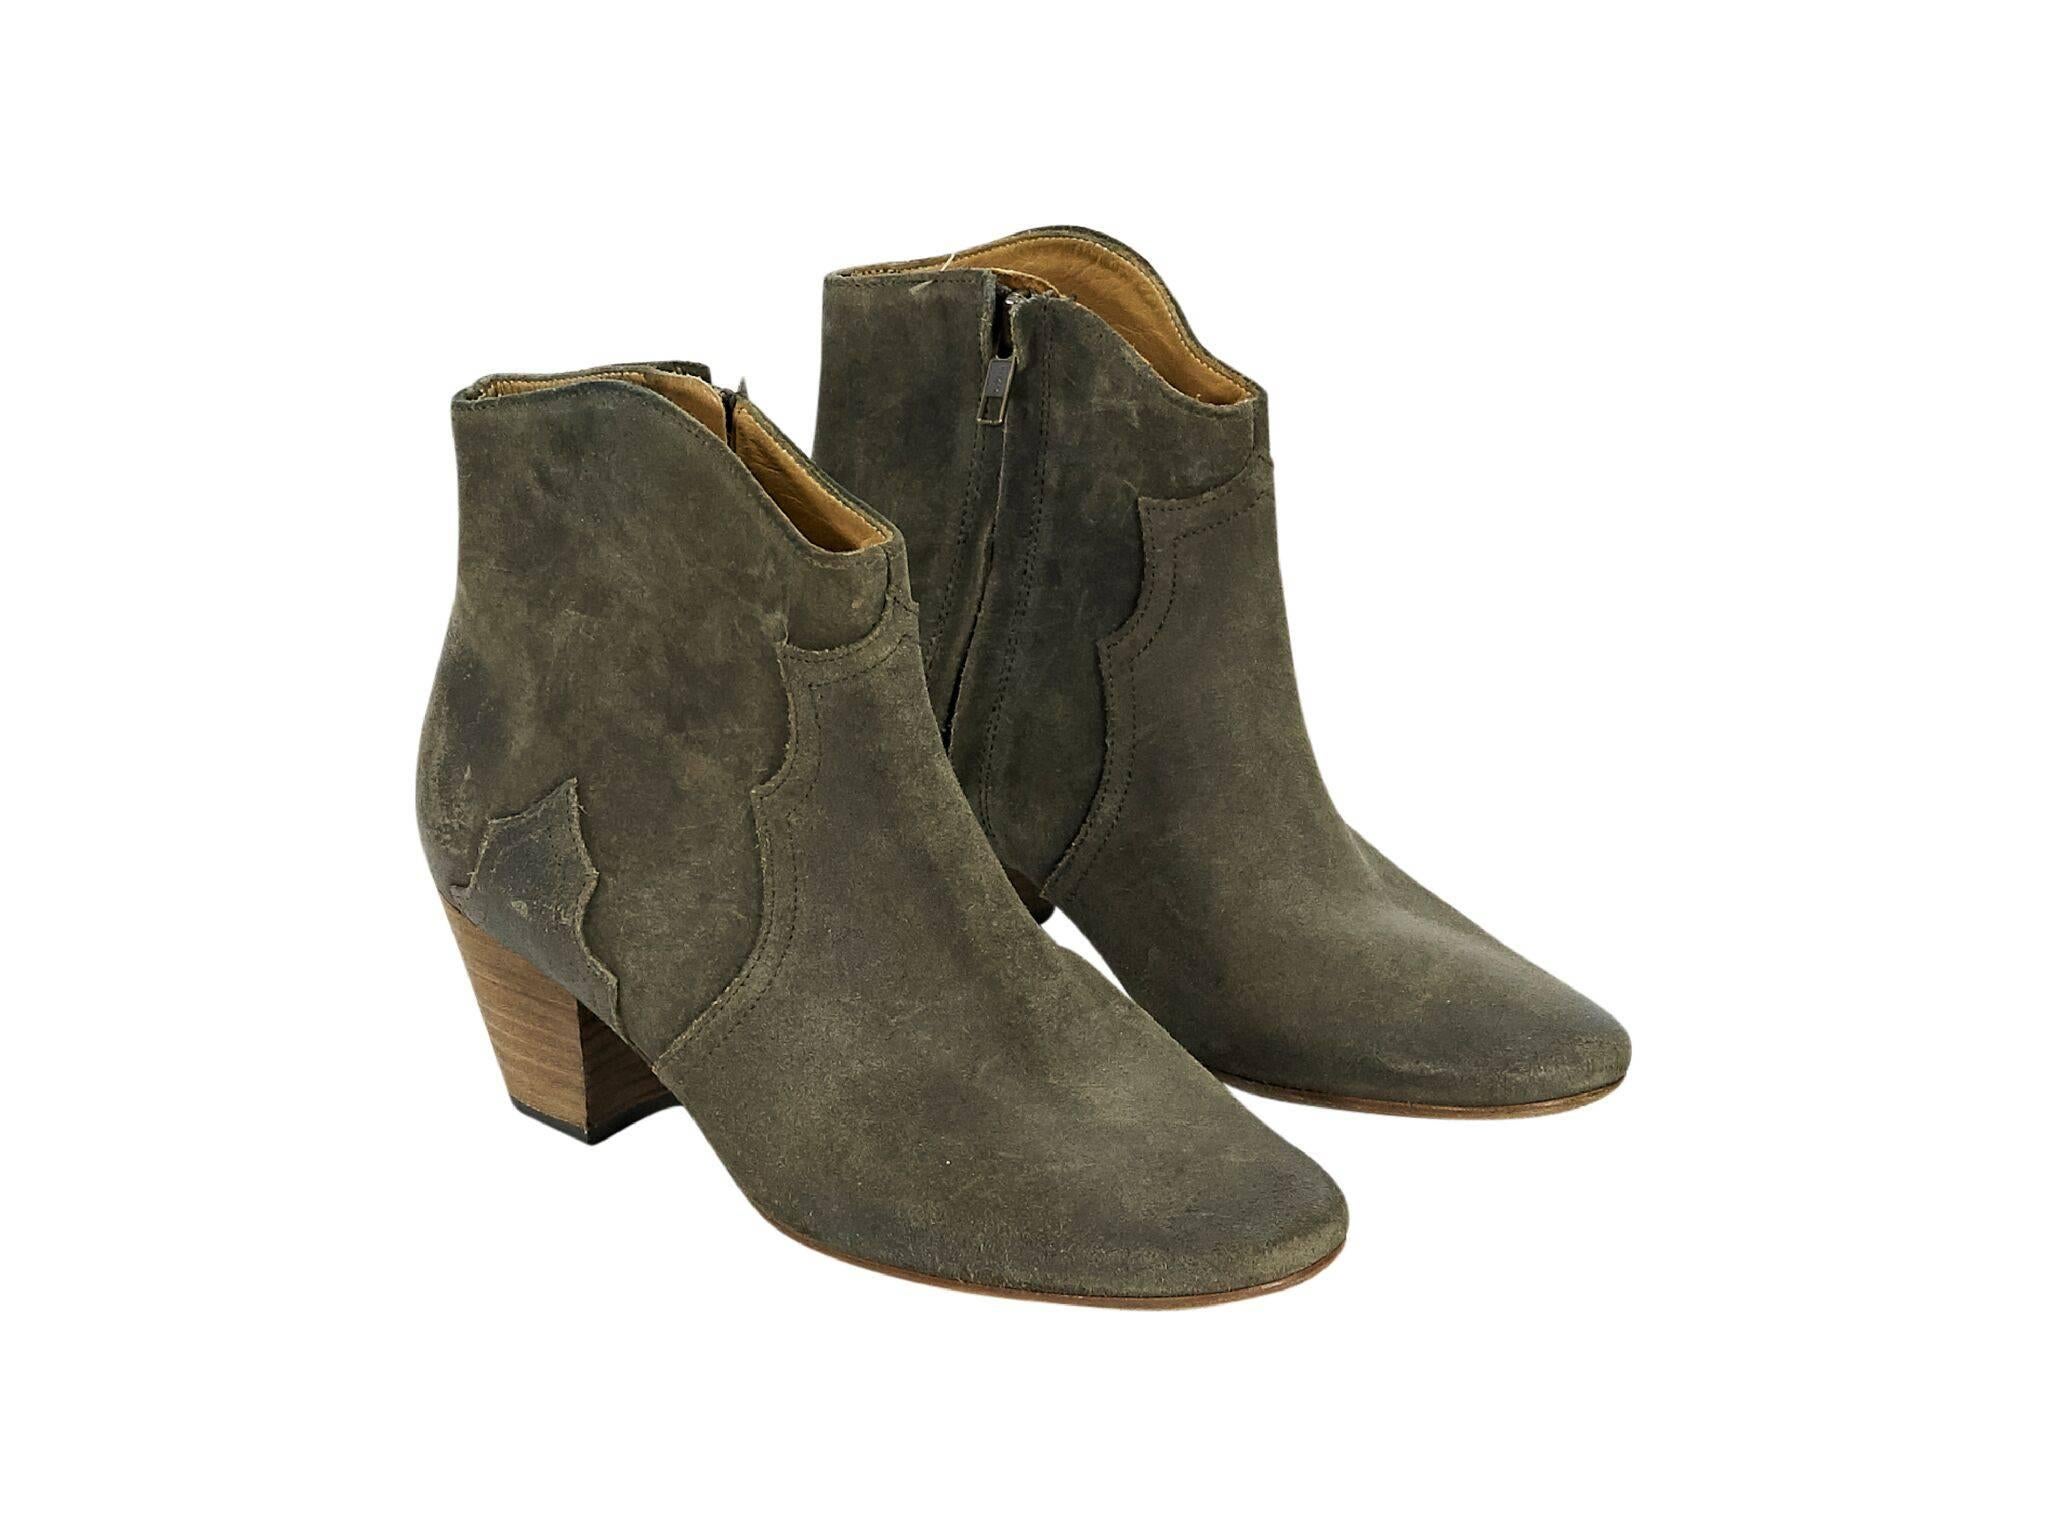 Product details:  Grey suede ankle boots by Isabel Marant.  Inner zip closure. Round toe.  Chunky stacked heel. 
Condition: Pre-owned. Very good. 
Est. Retail $895